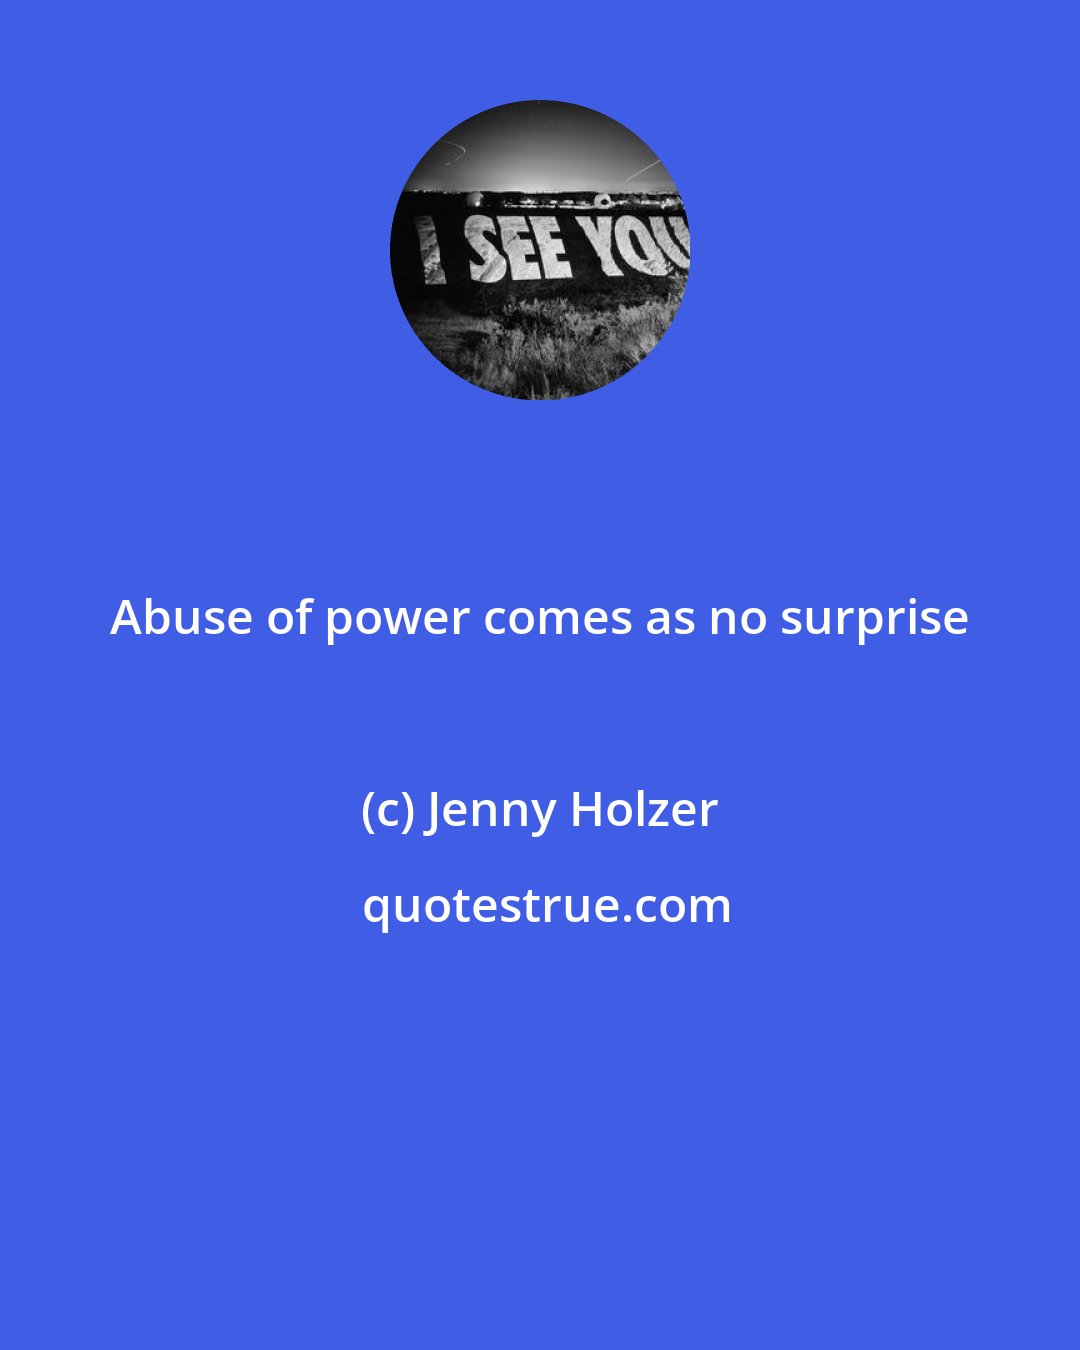 Jenny Holzer: Abuse of power comes as no surprise